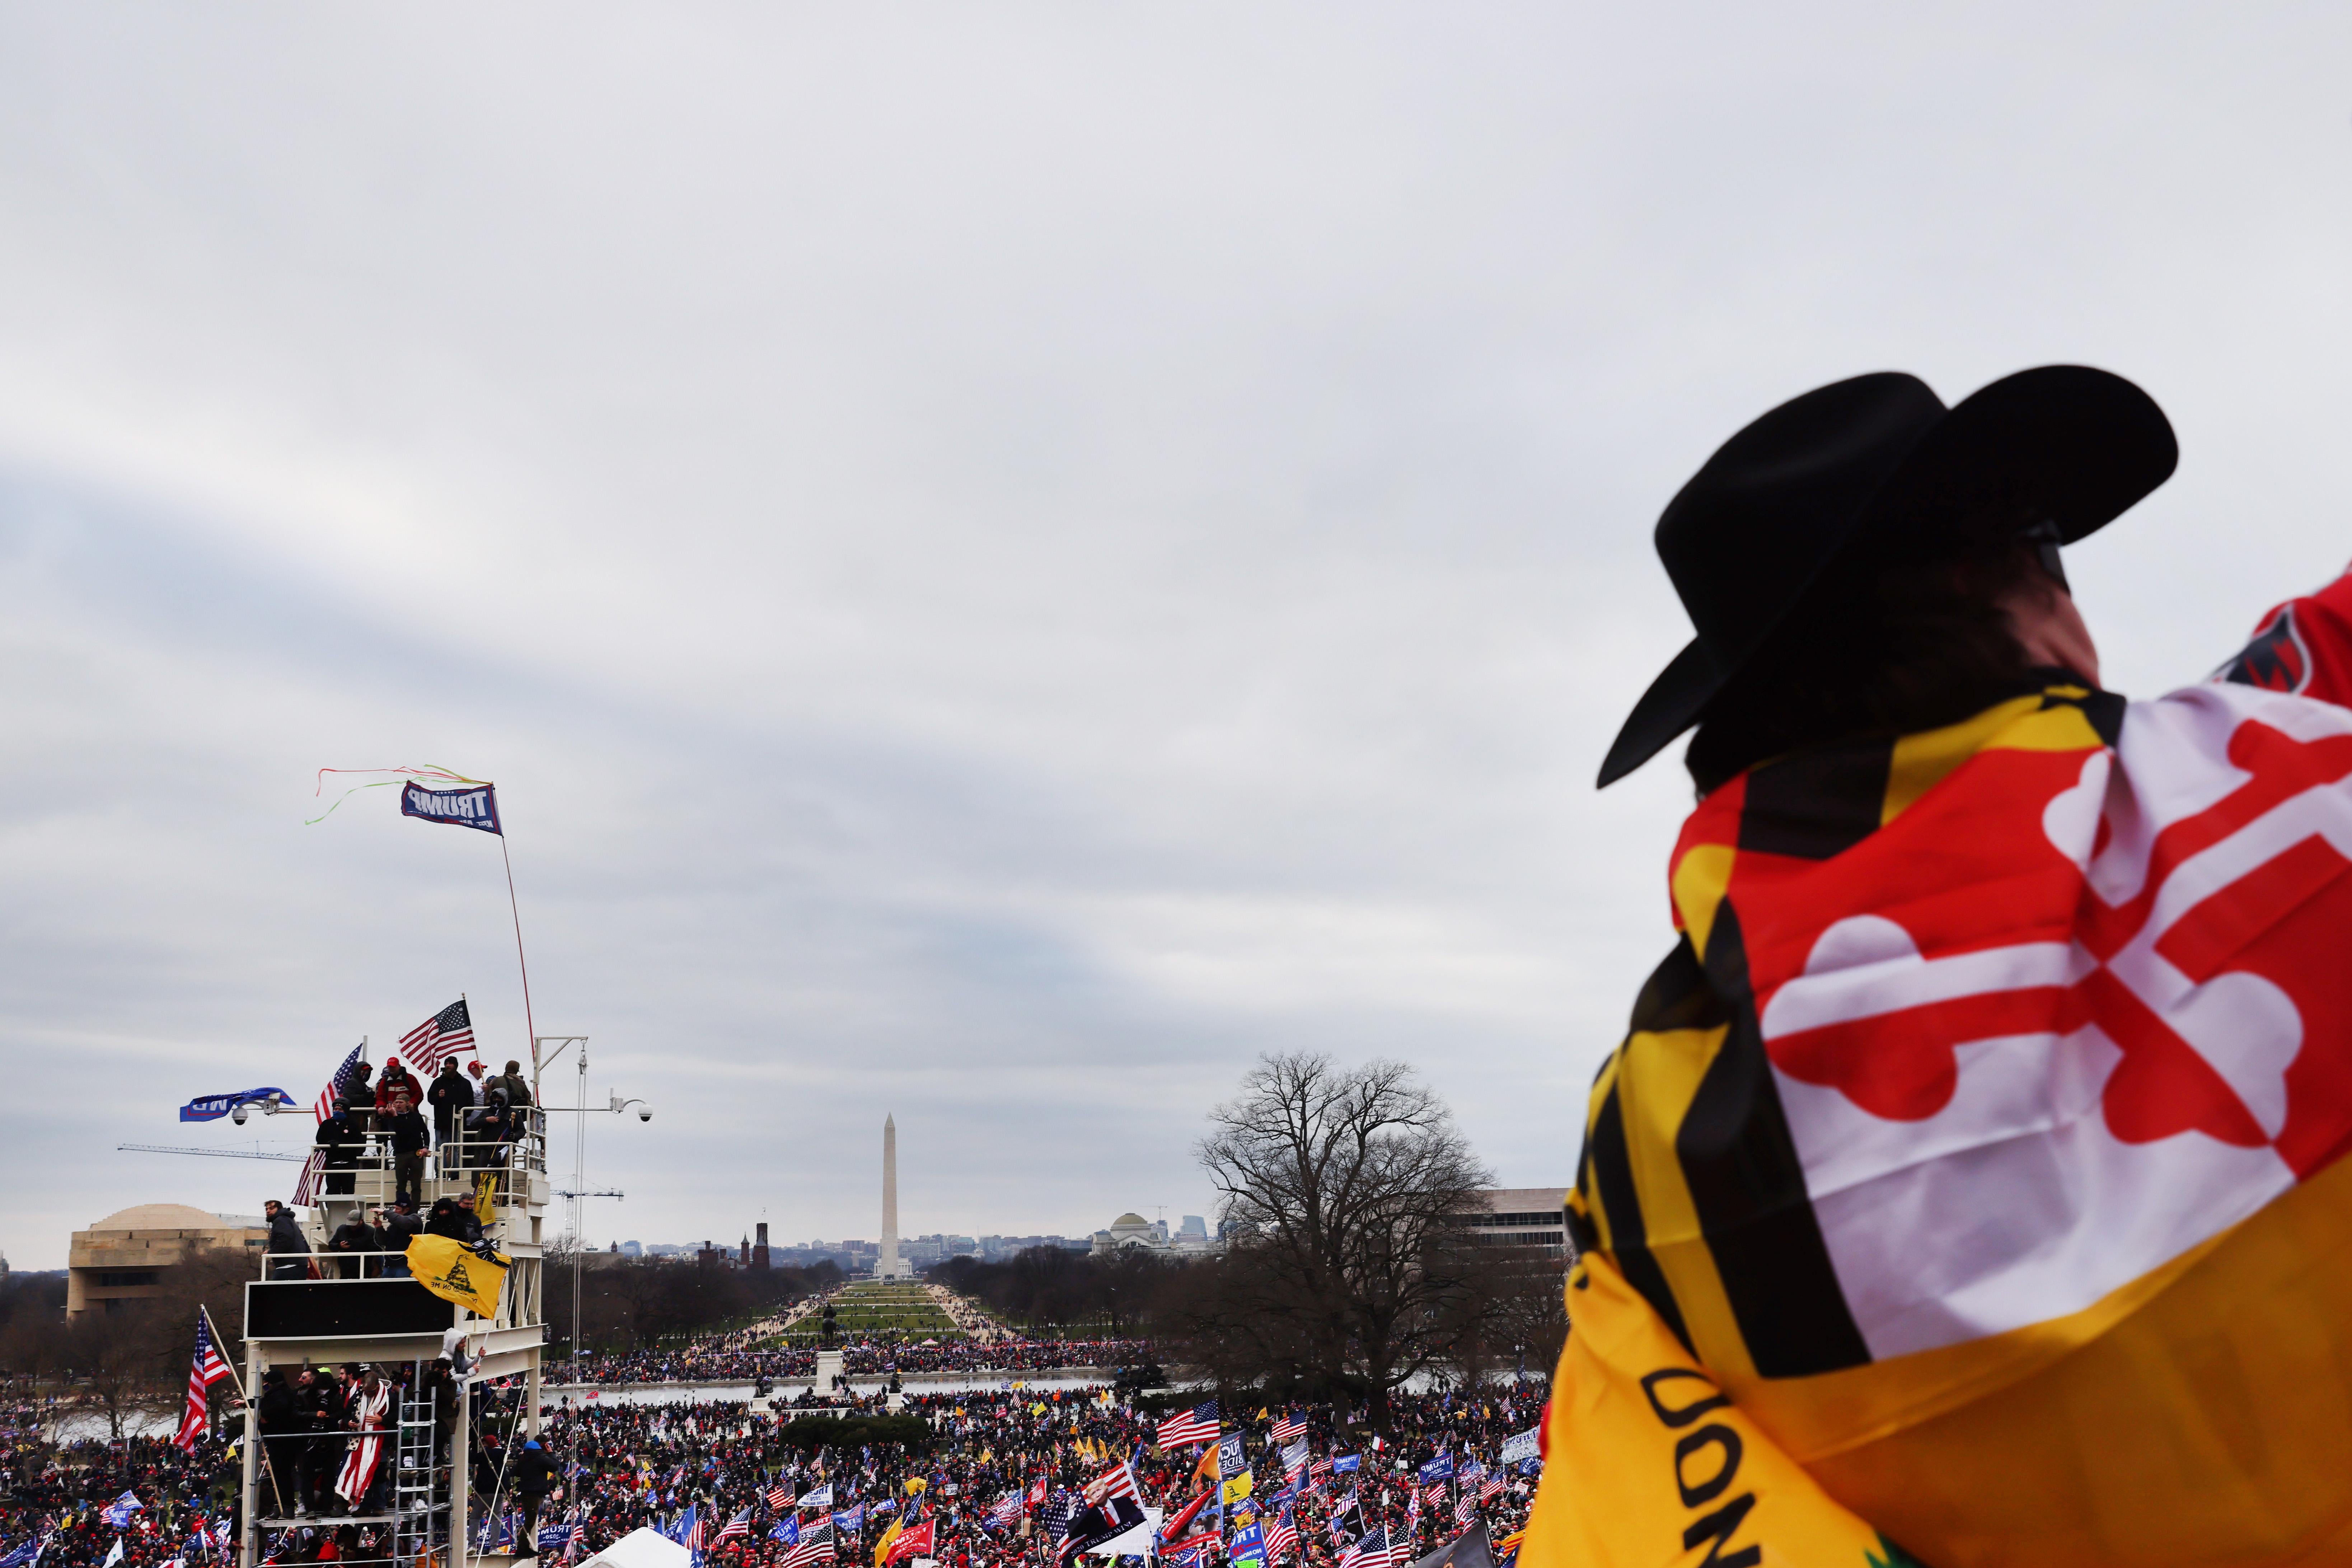 A man in a cowboy hat with a Don't Tread on Me flag raises his fist above a crowd of protesters.